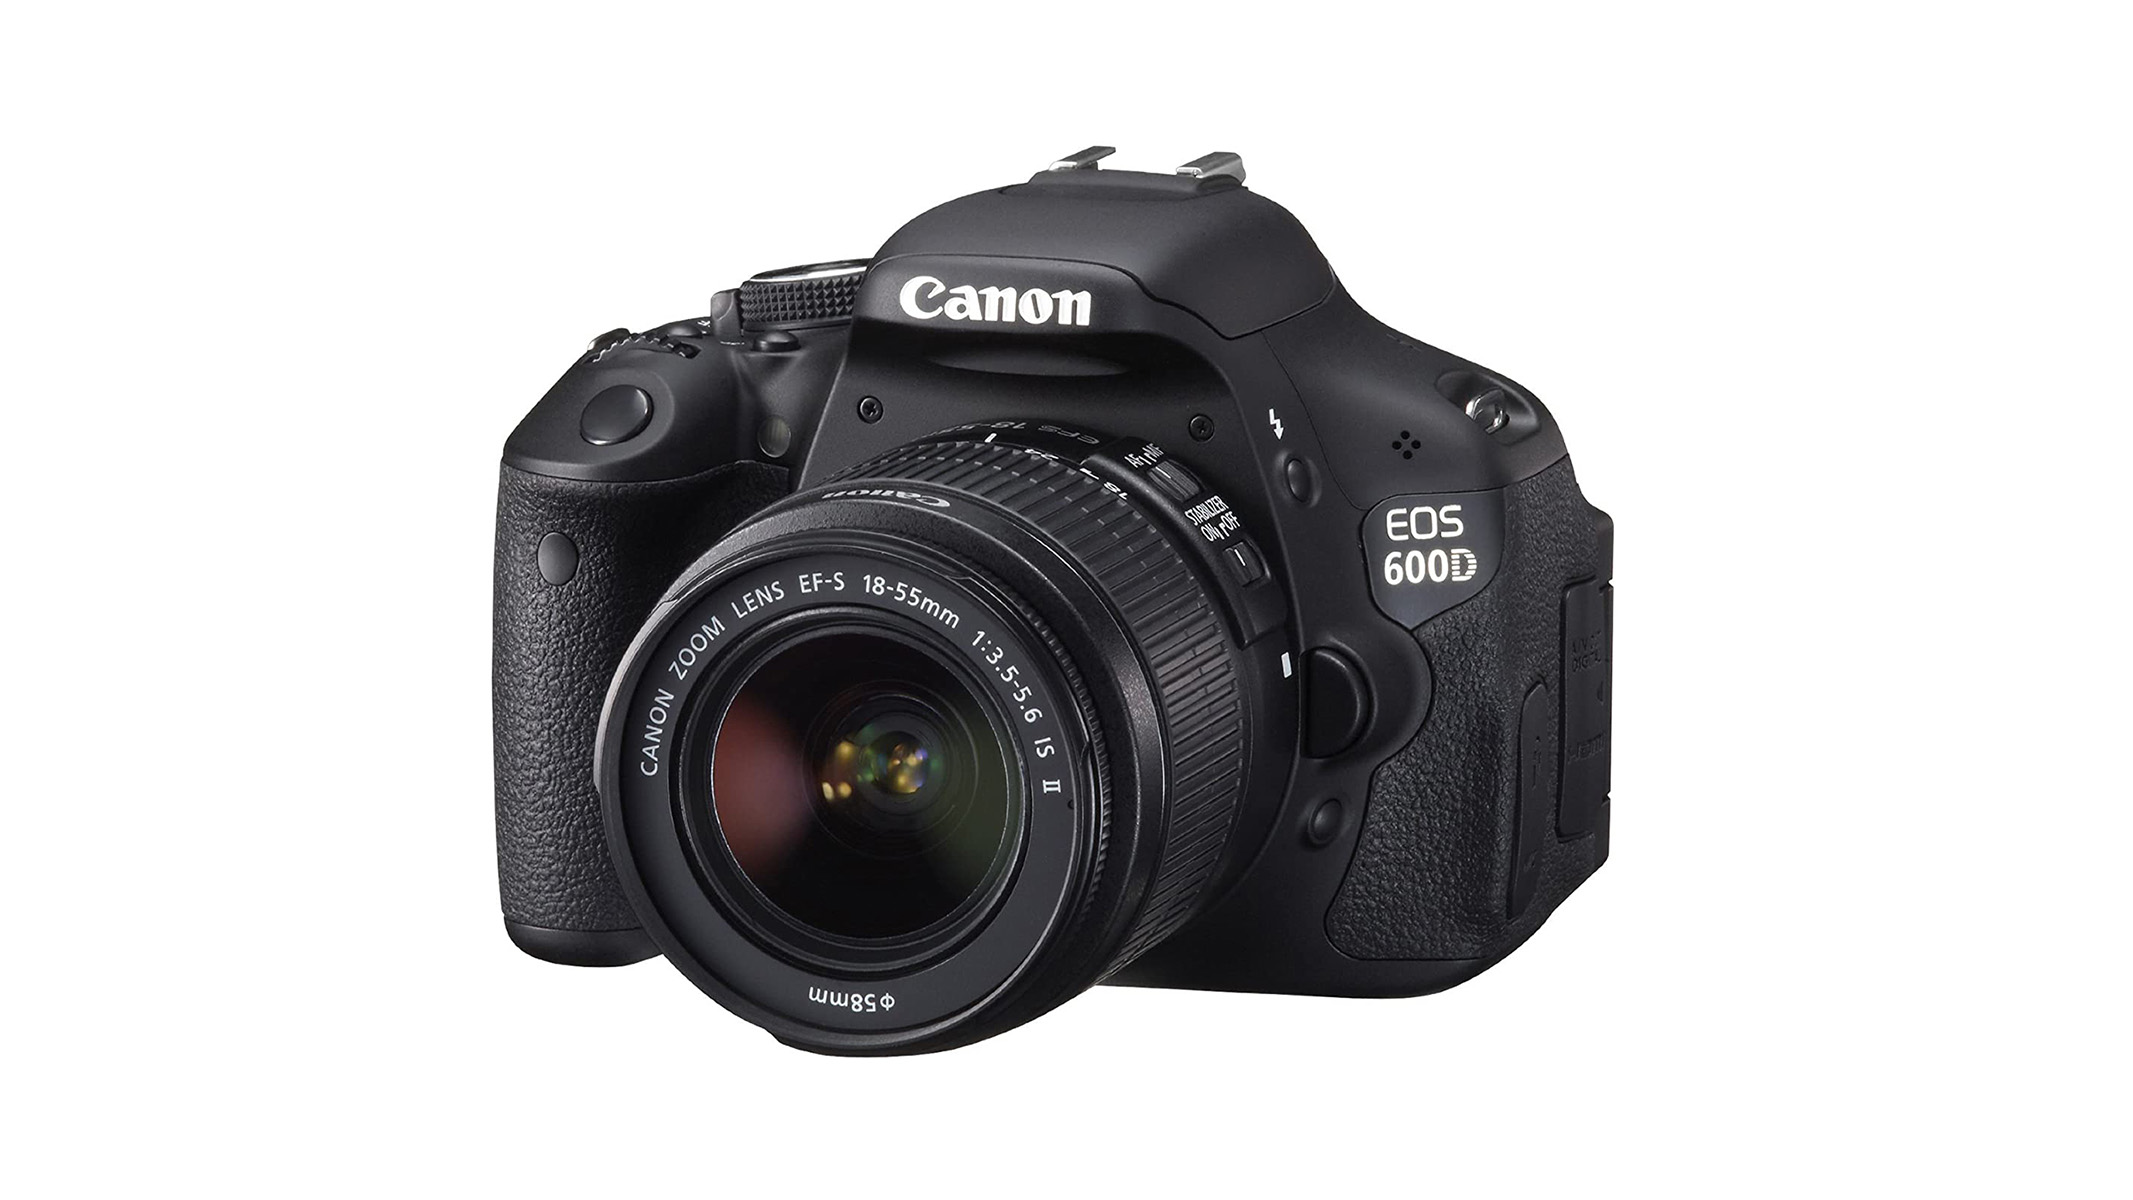 Product Picture of Canon 600D